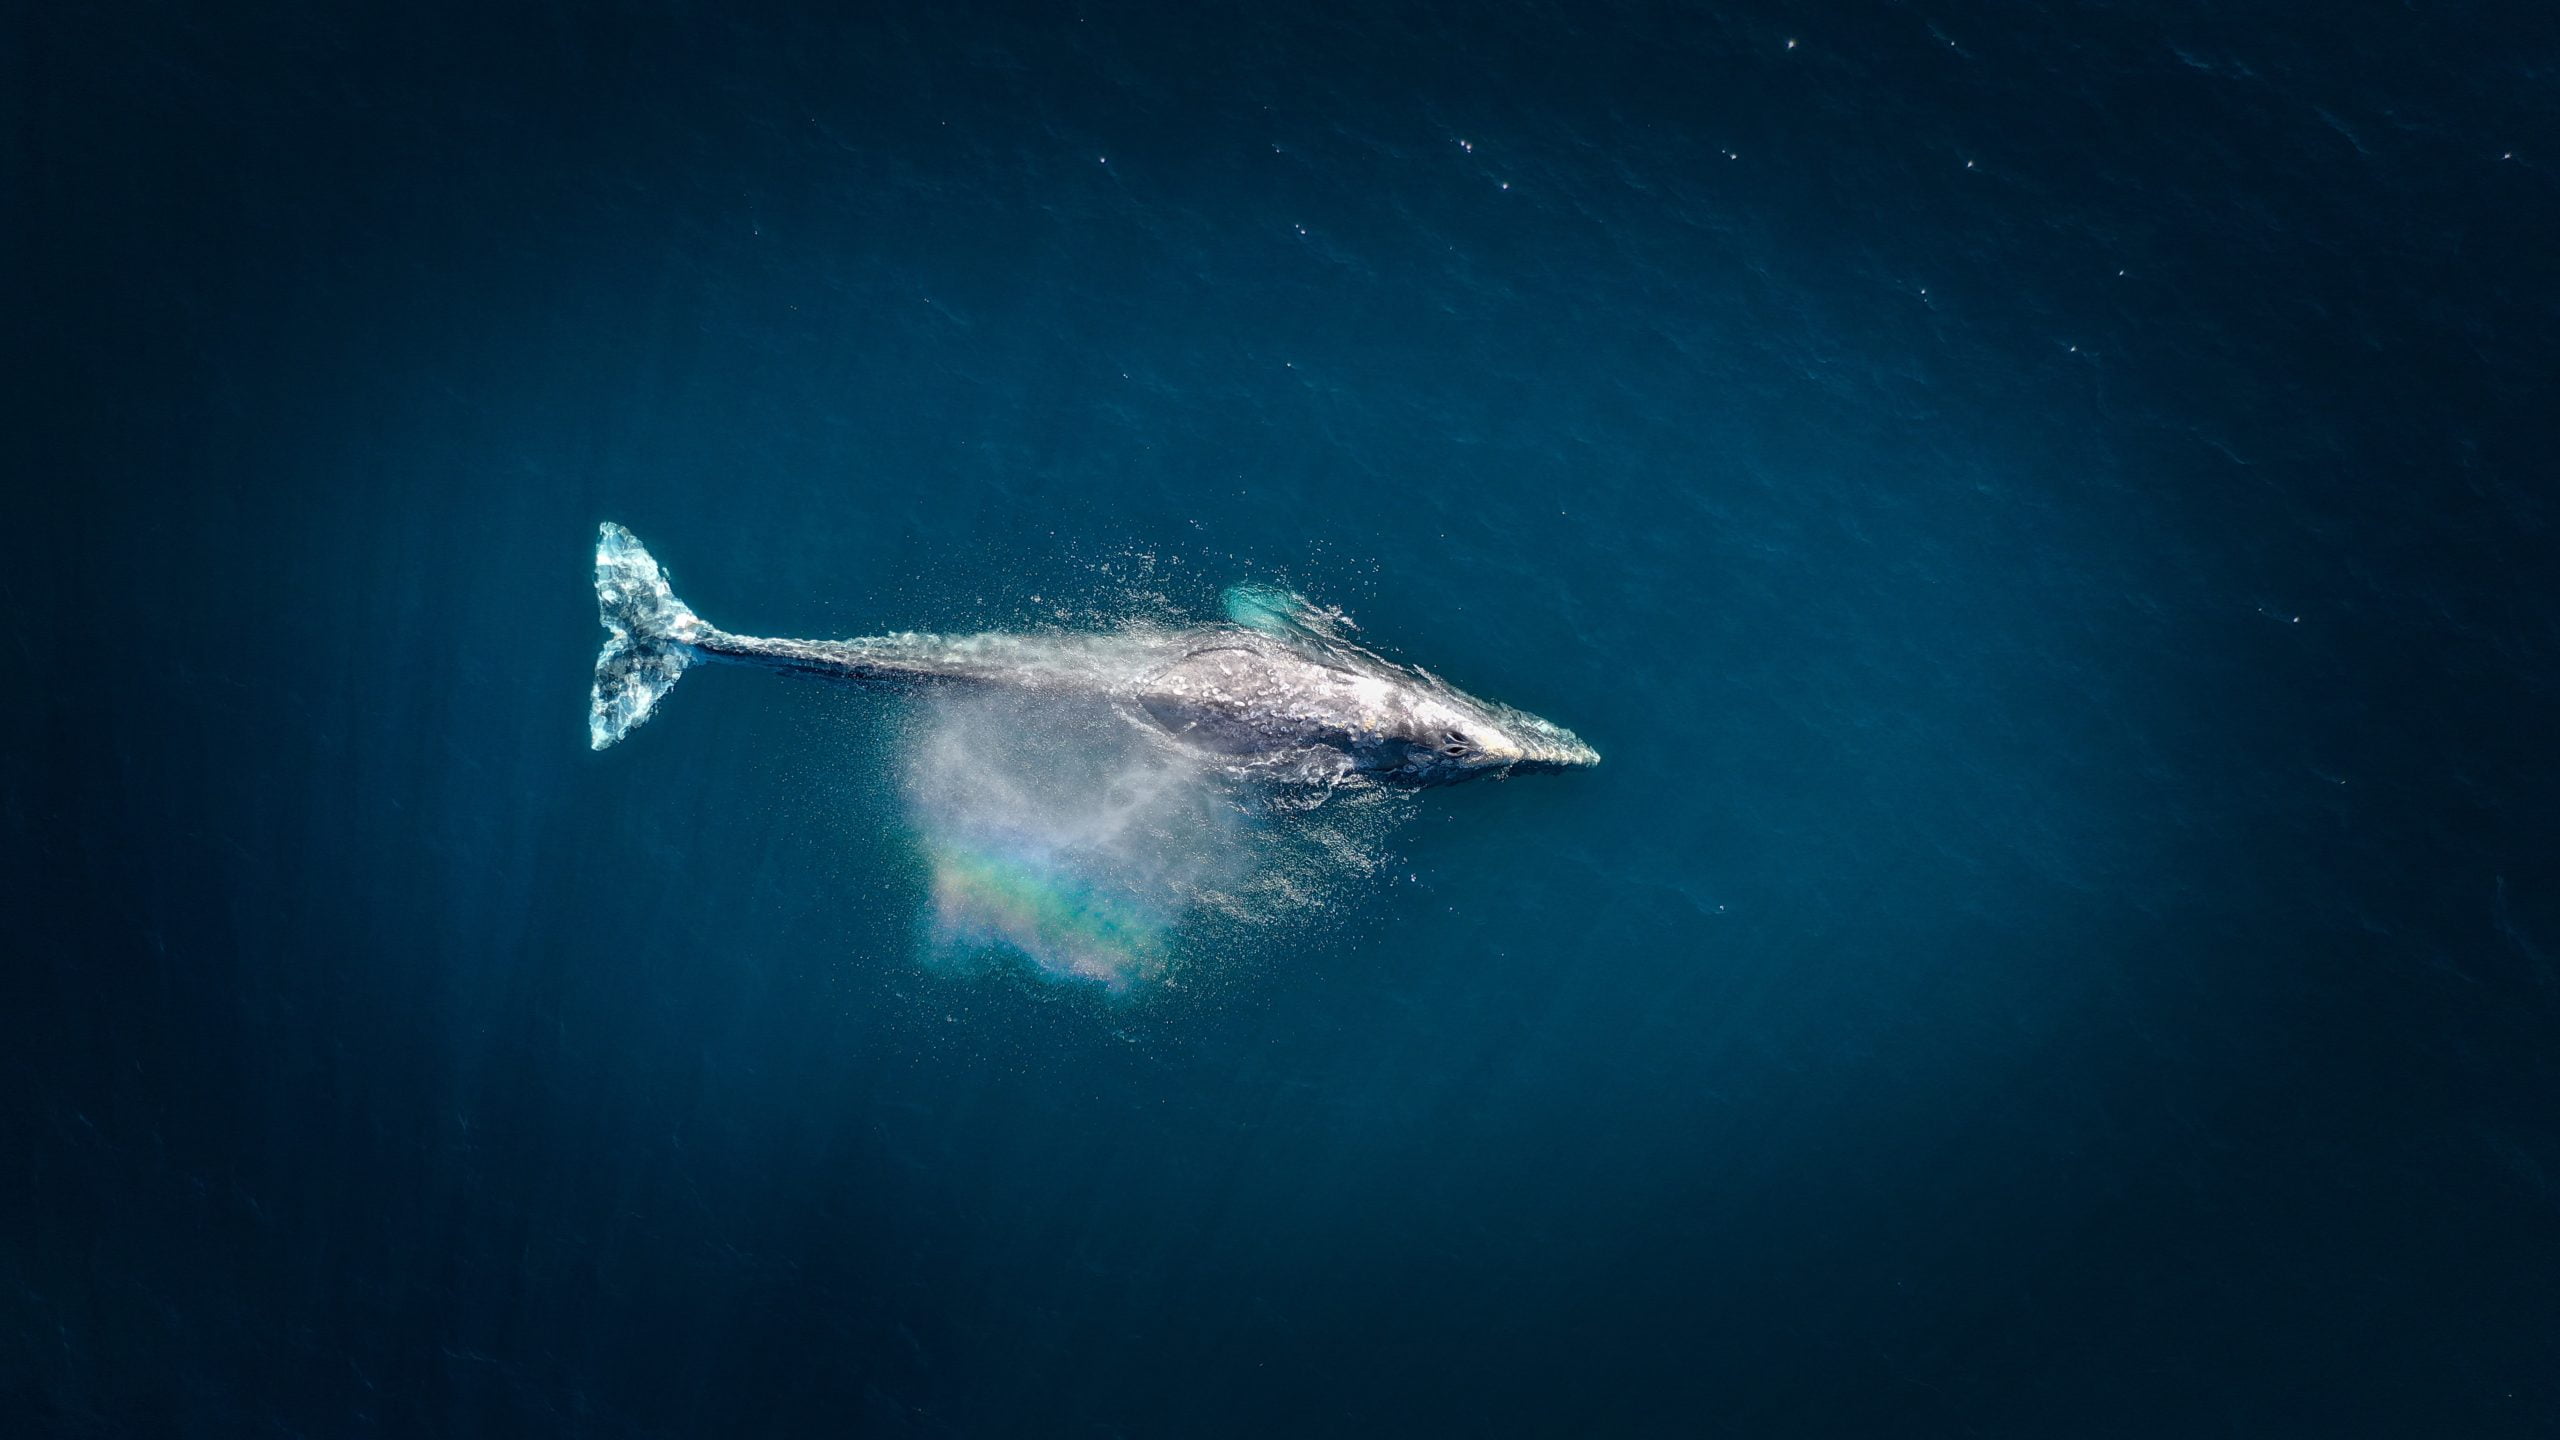 whale featured image for BItcoin article